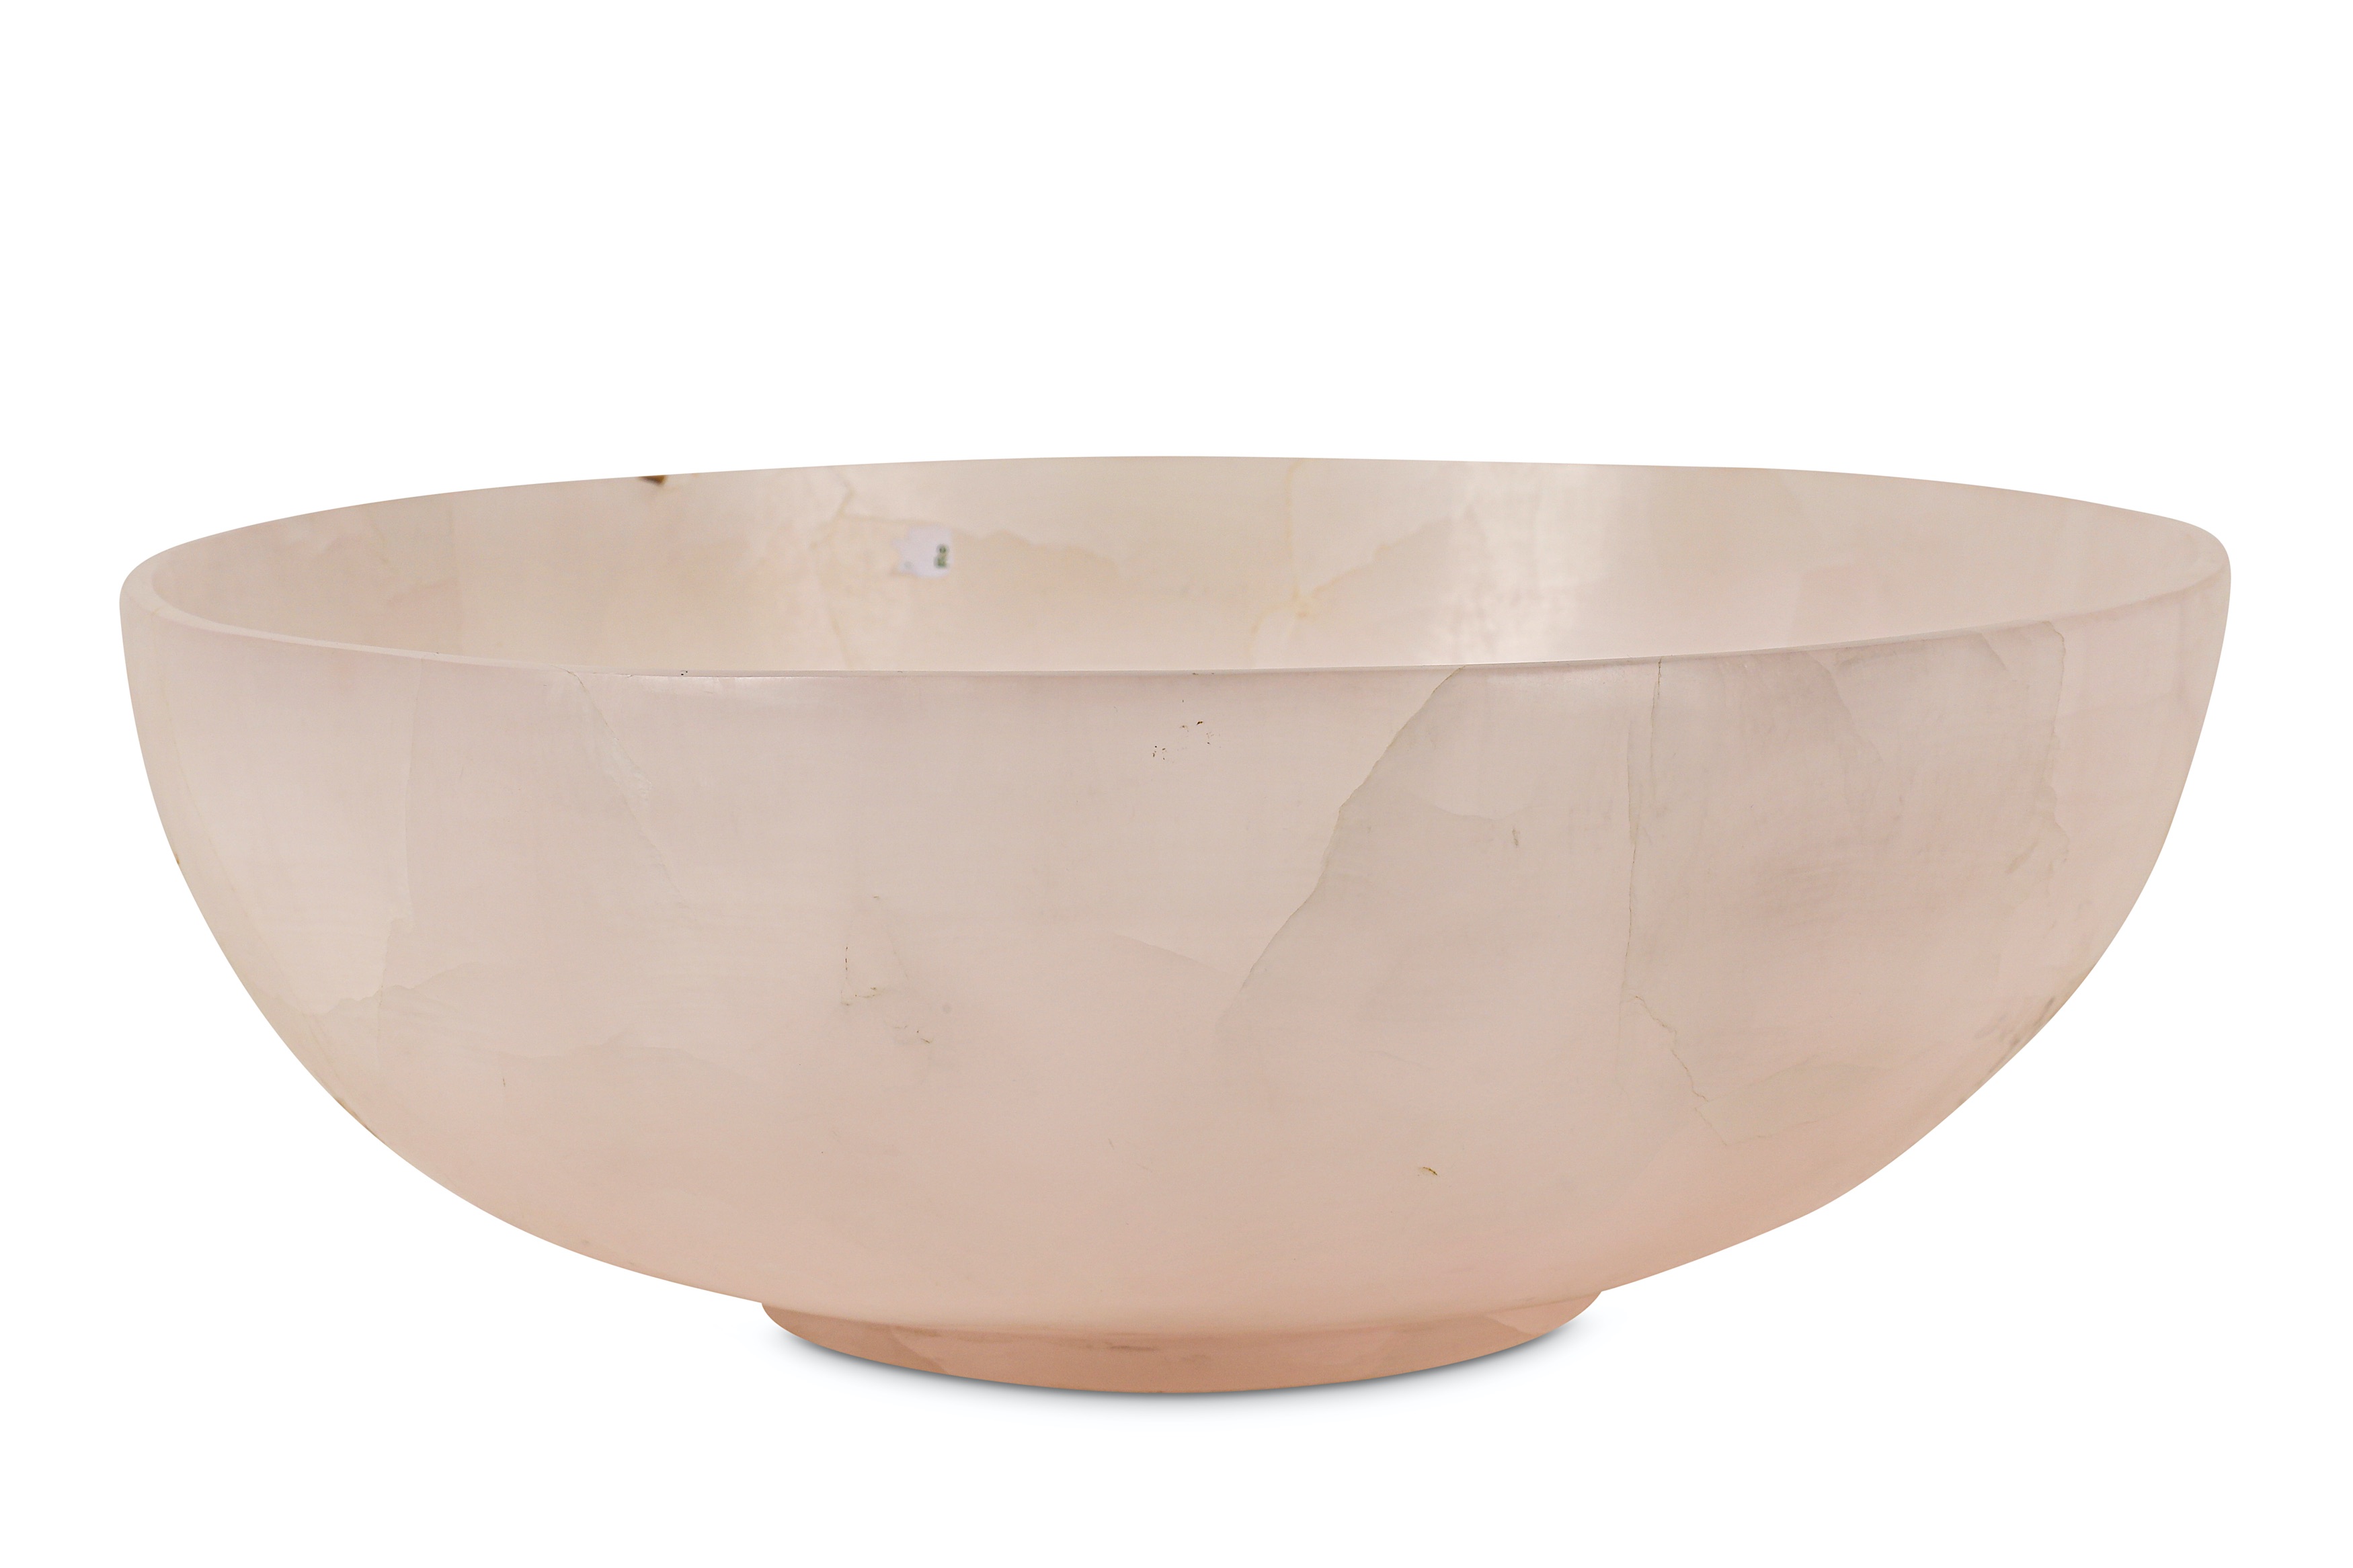 A LARGE AND IMPRESSIVE CARVED PINK MANGANO CALCITE BOWL - Image 4 of 6